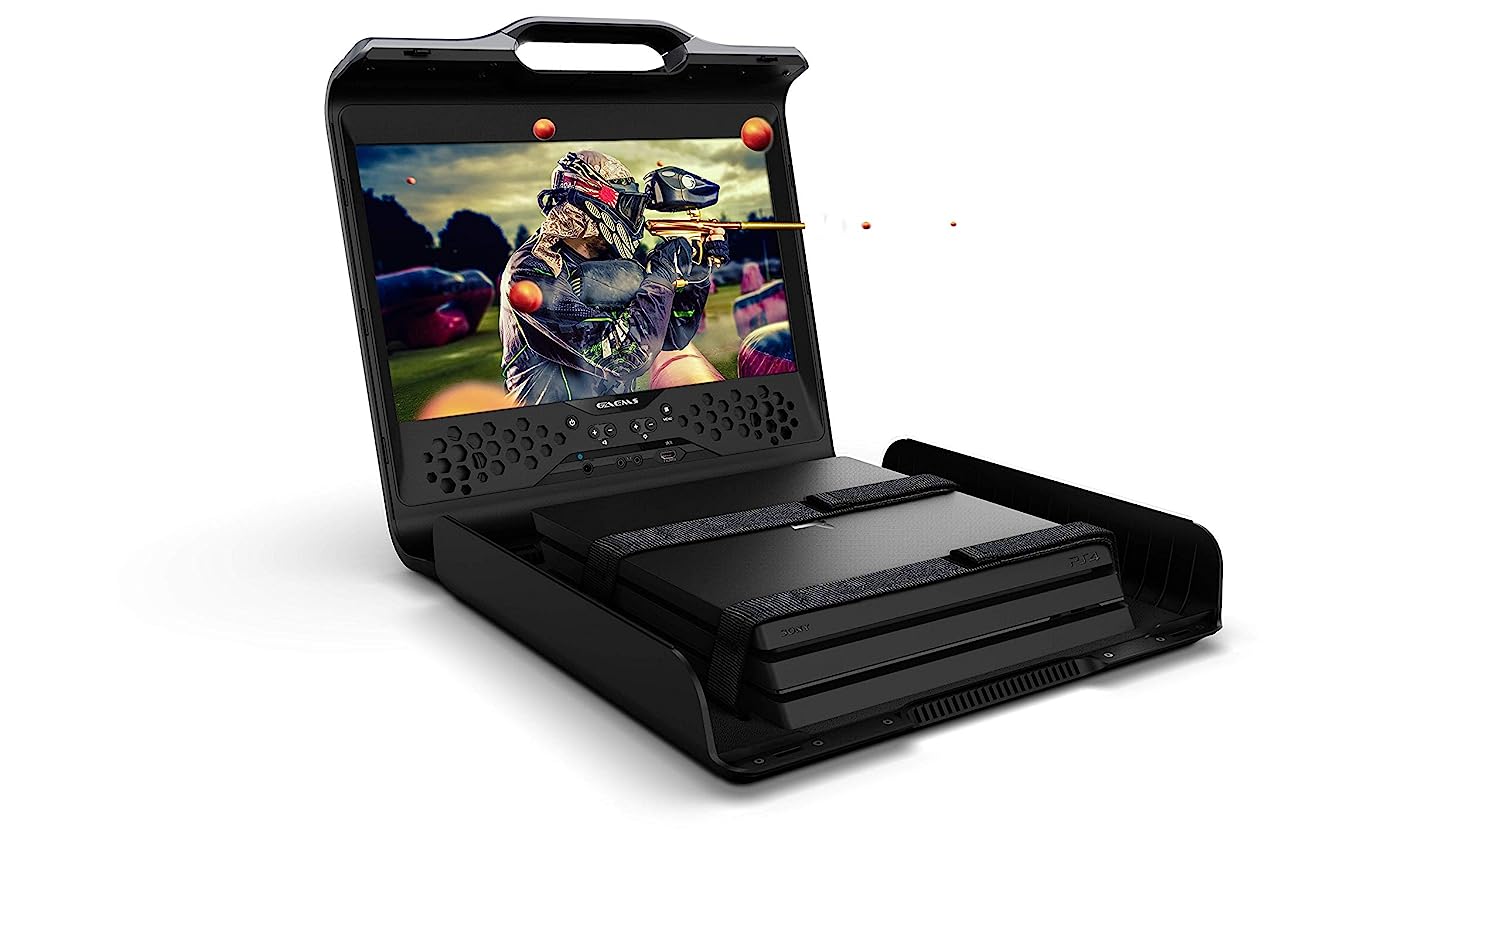 Sentinel Pro Xp 1080P Portable Gaming Monitor for Xbox [...]